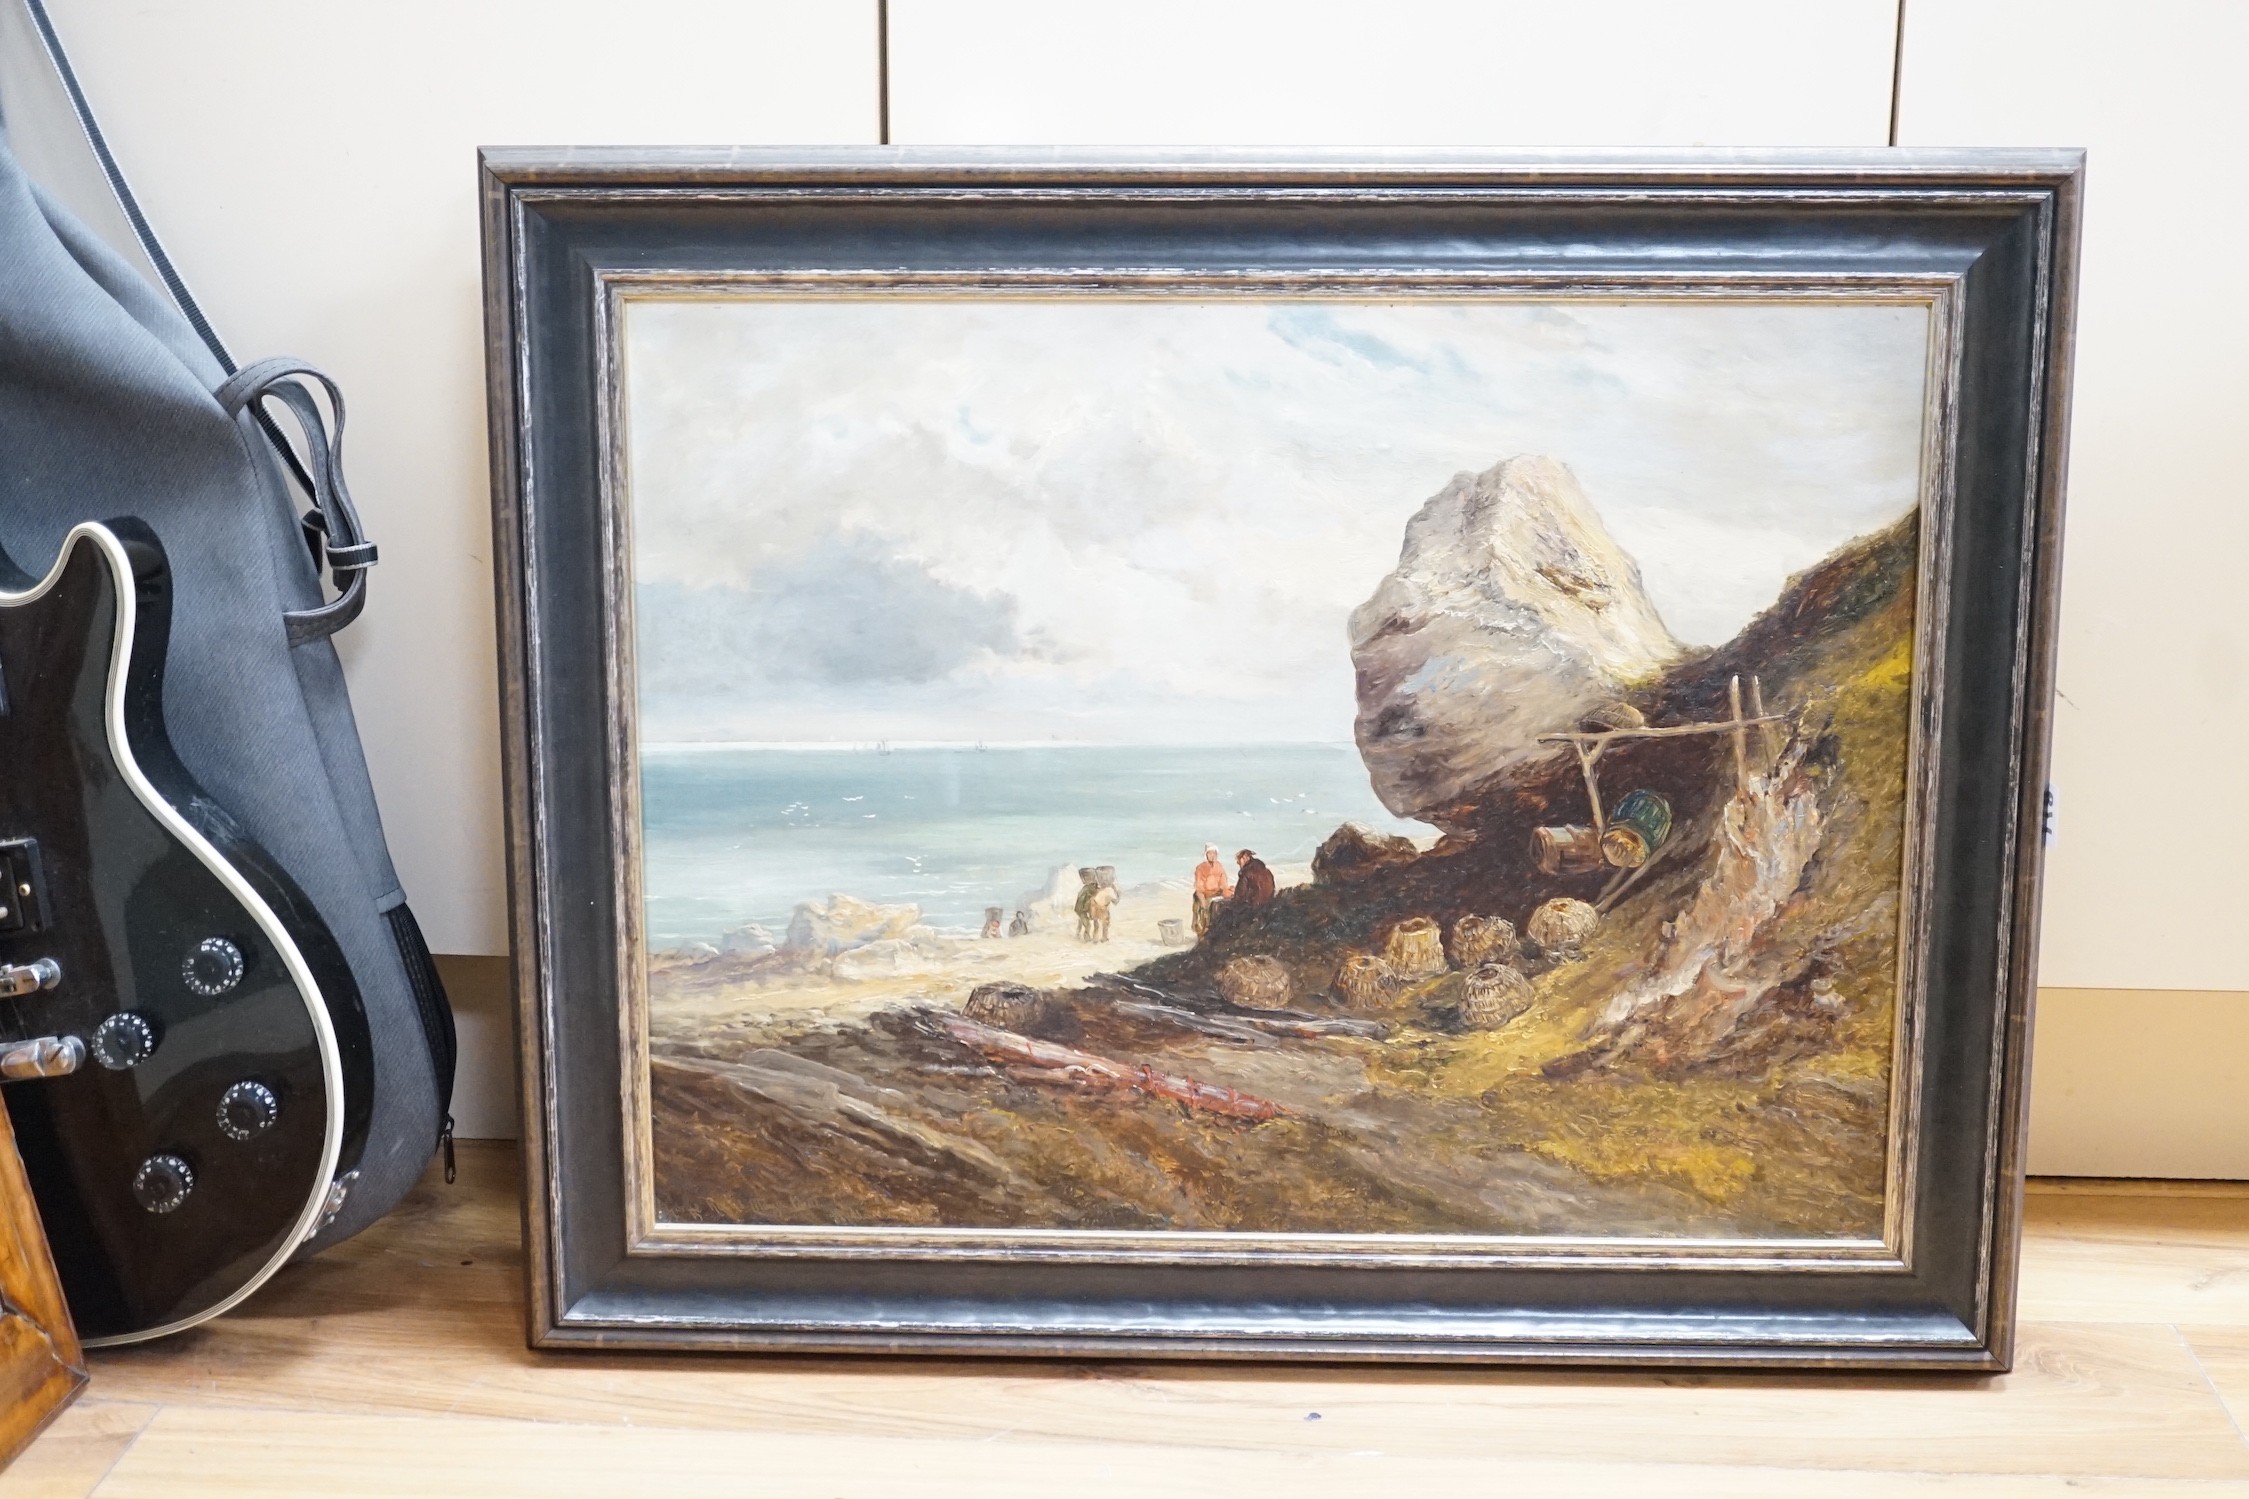 John Holland Snr (1805-1879), oil on canvas, 'Giraffe Rocks, Mayo Point, Guernsey', signed and titled, 45 x 60cm